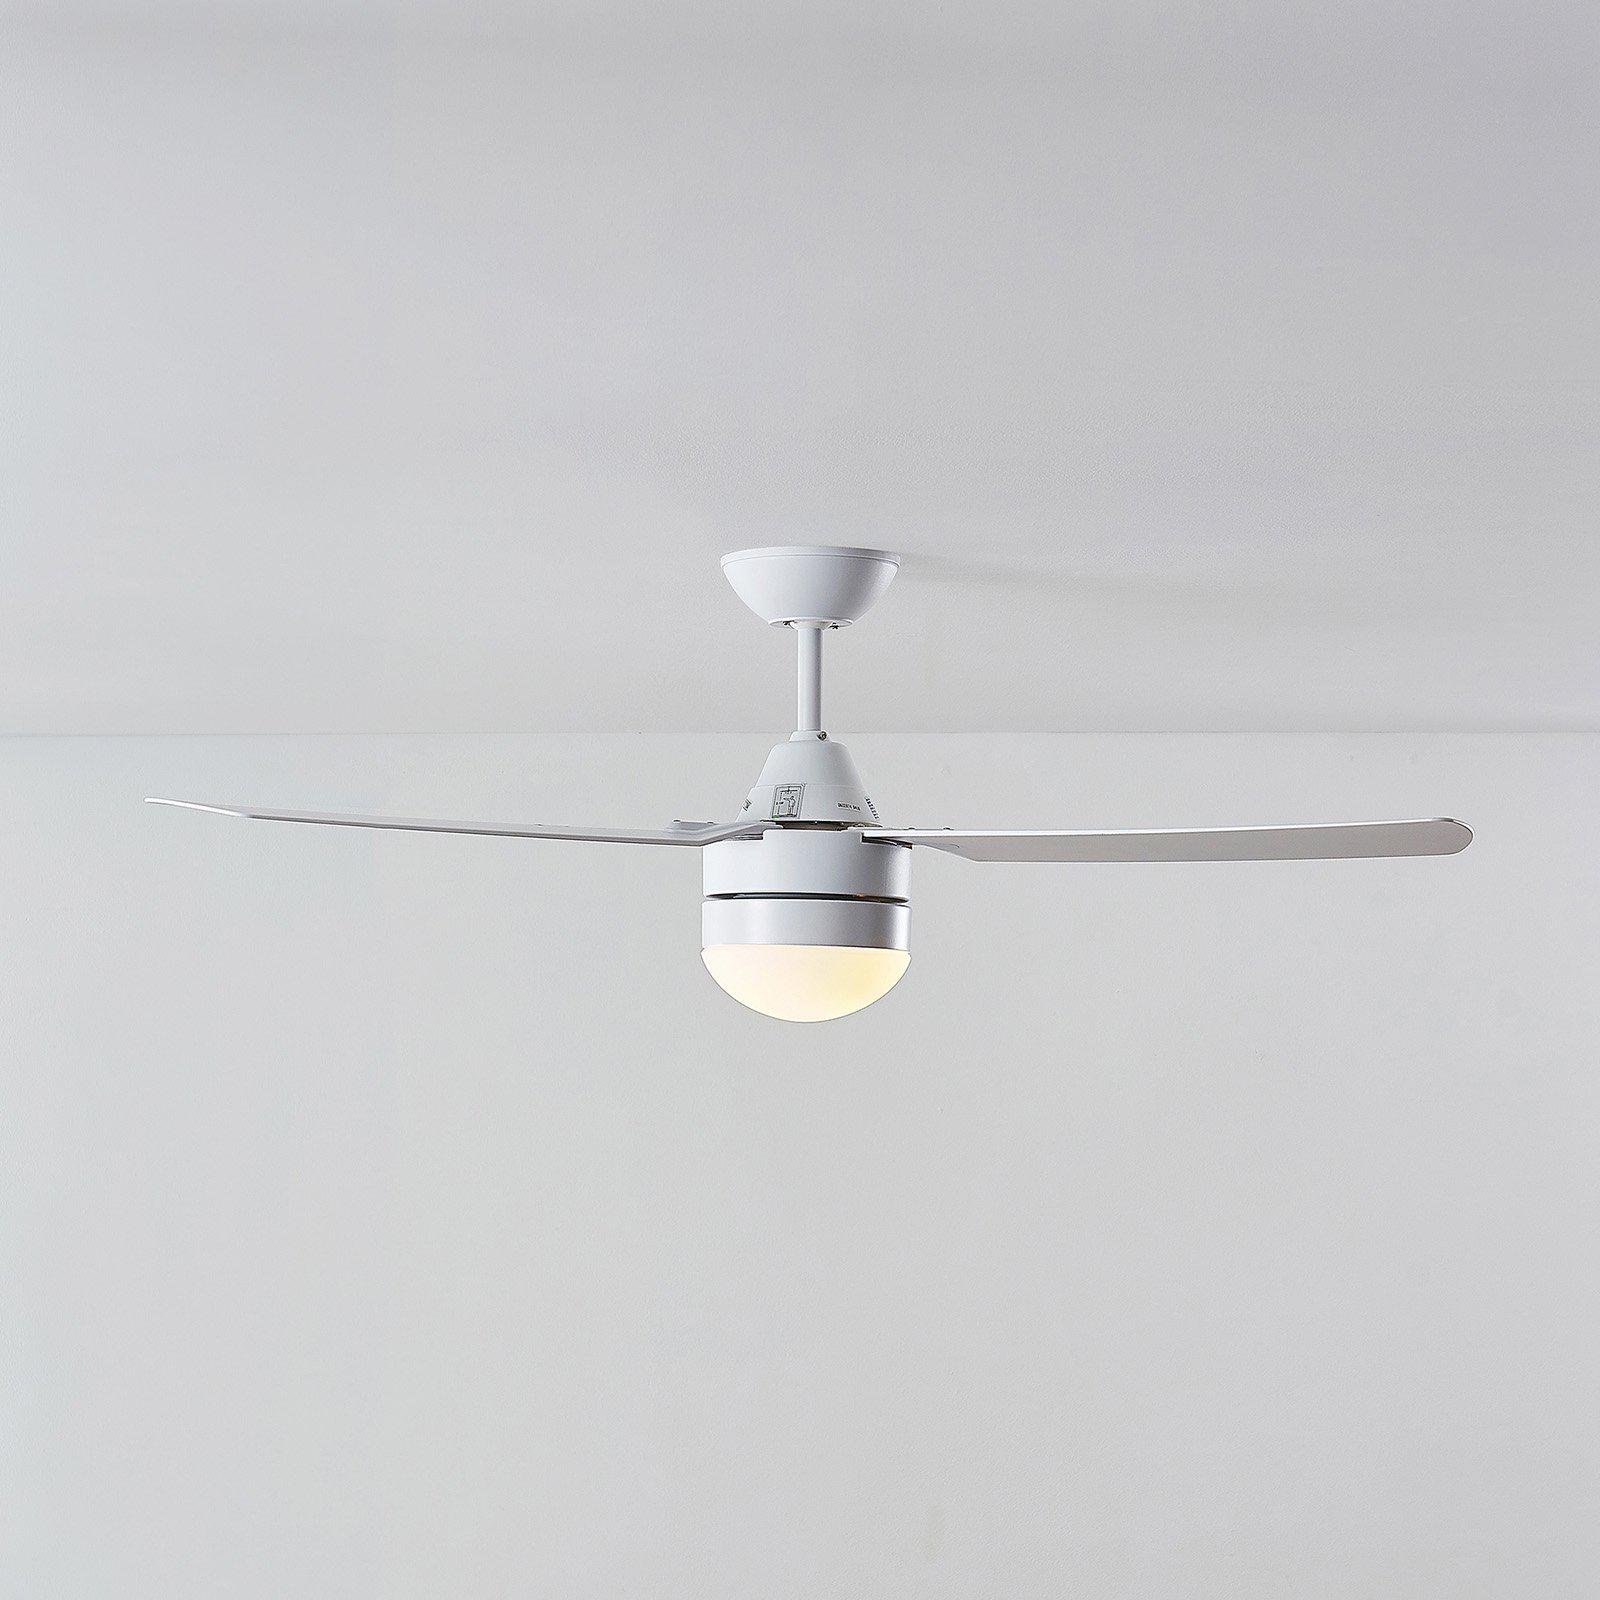 Arcchio Andi 9624665 Ceiling Fan with Light